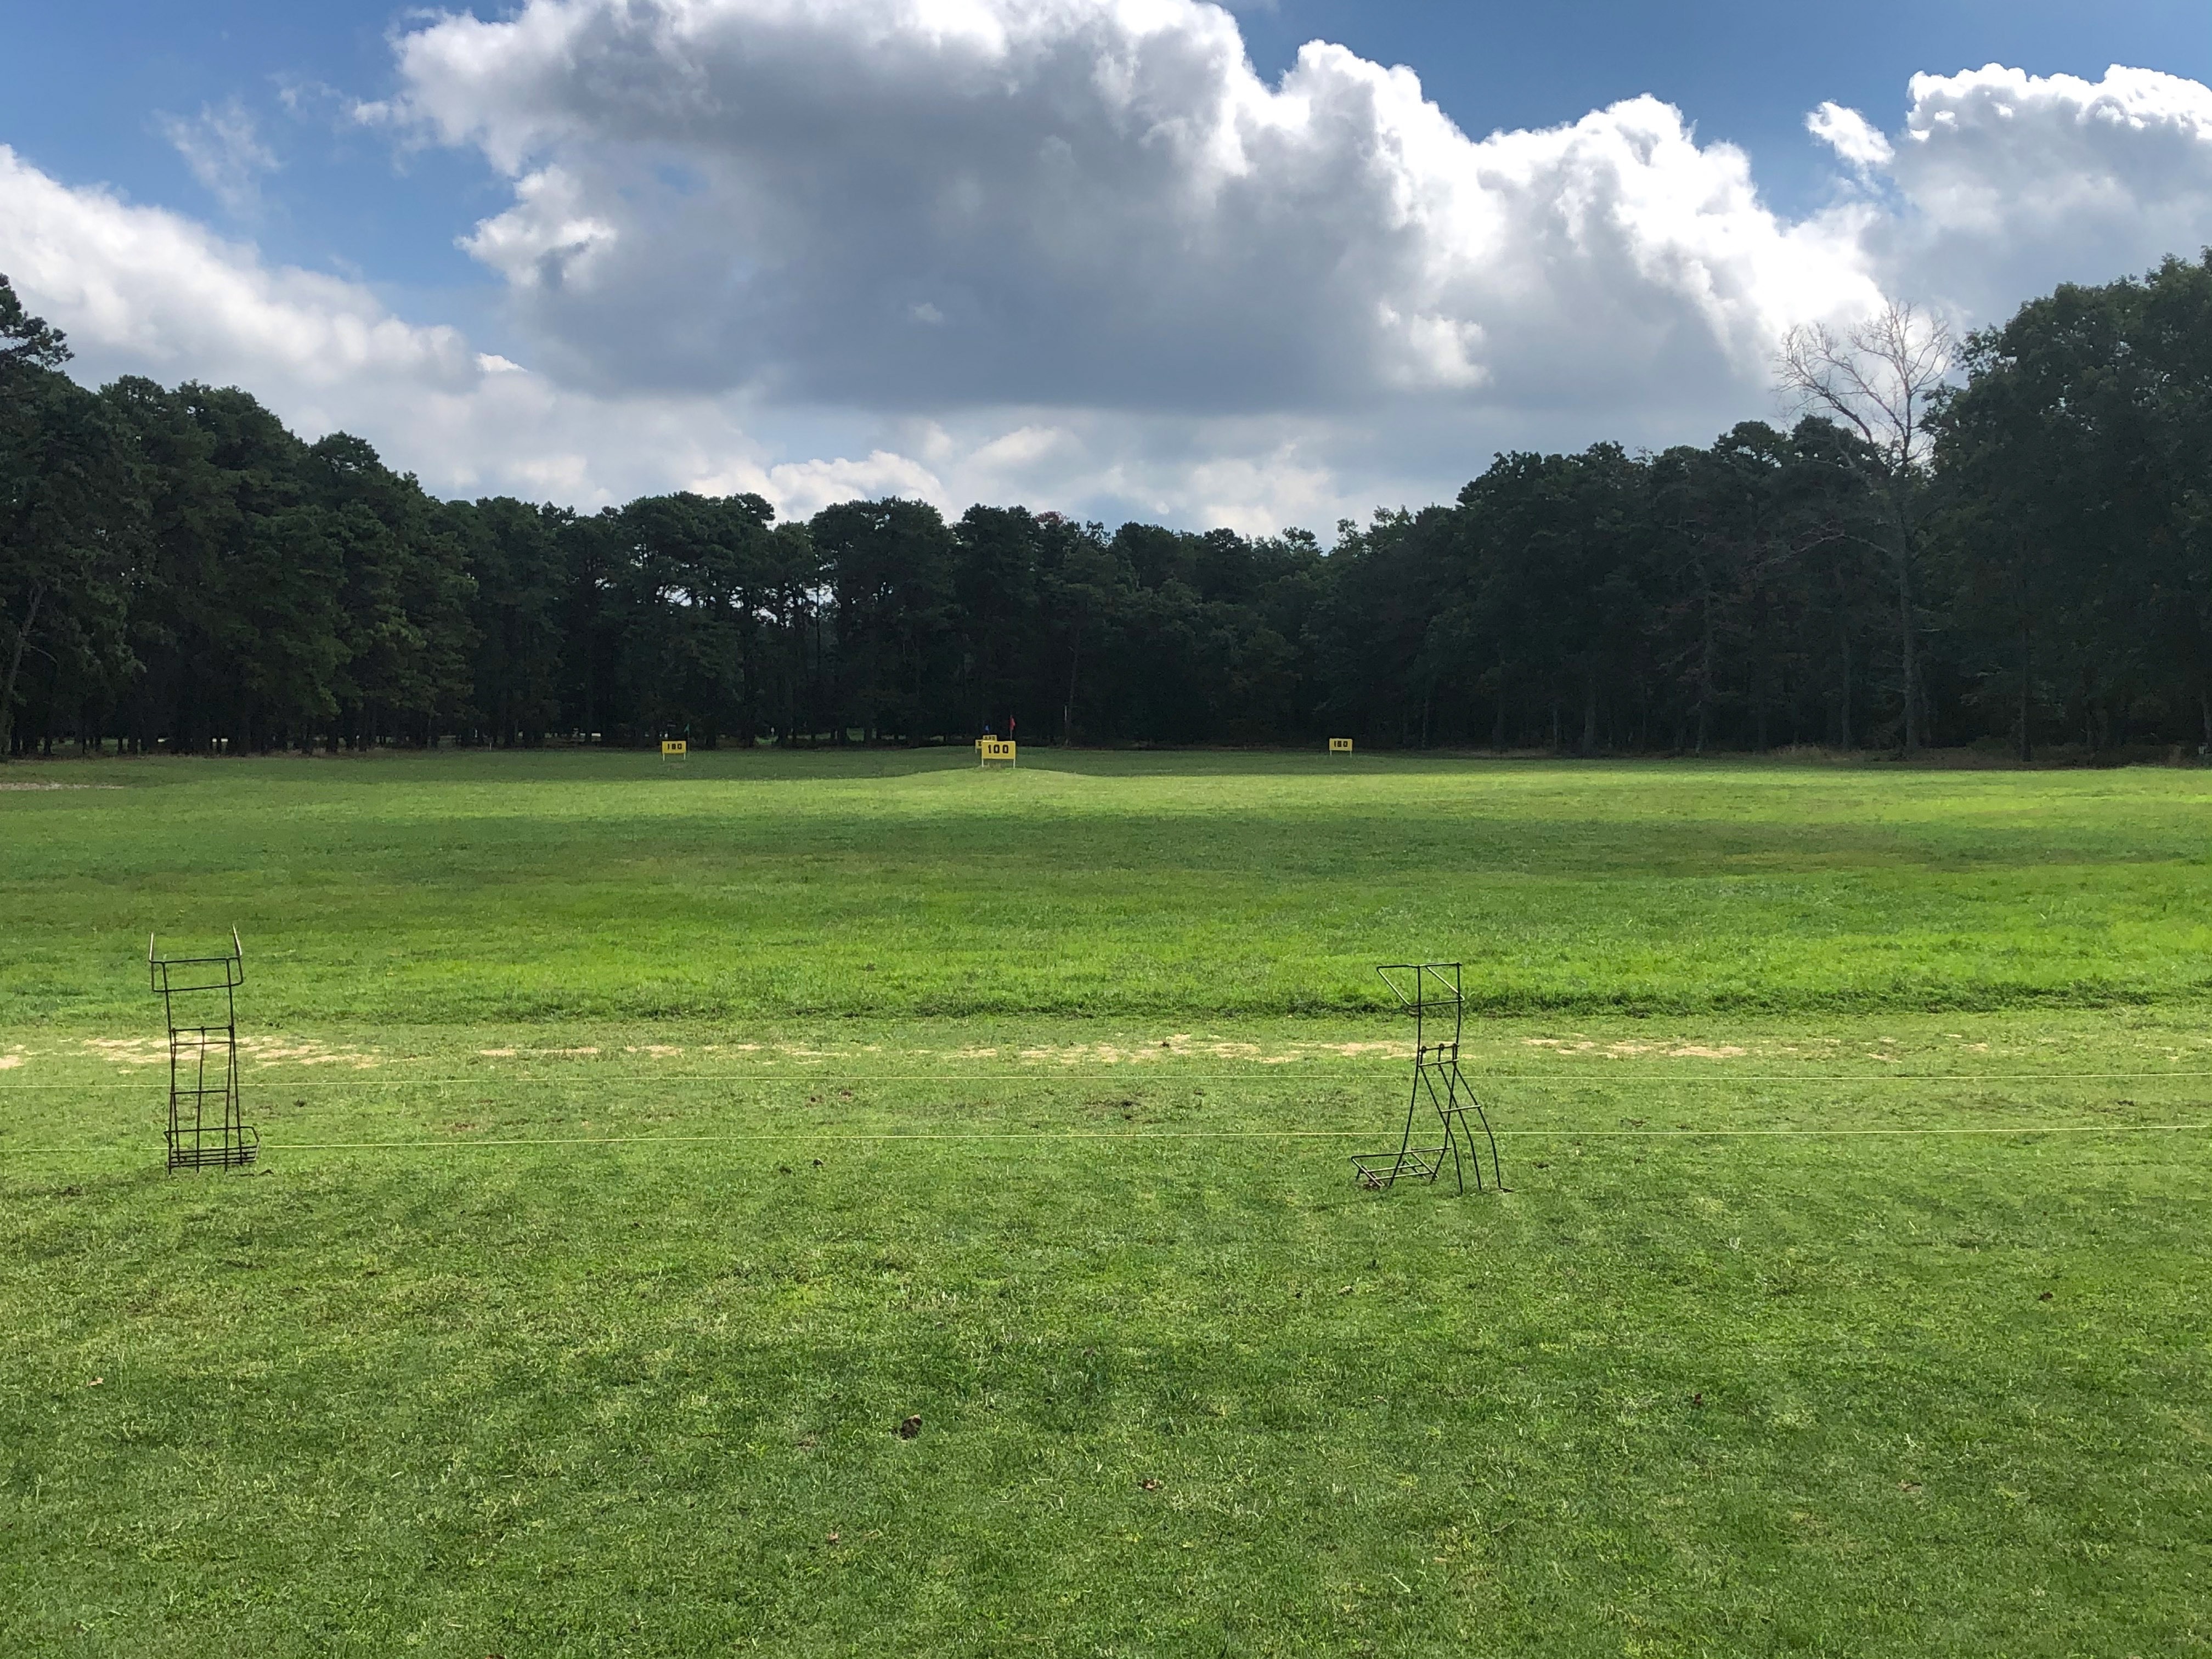 The grass driving range at Buena Vista Country Club. There are bag holders located at the hitting area. In the range, there are various yardage markers indicating the distance from the hitting area.